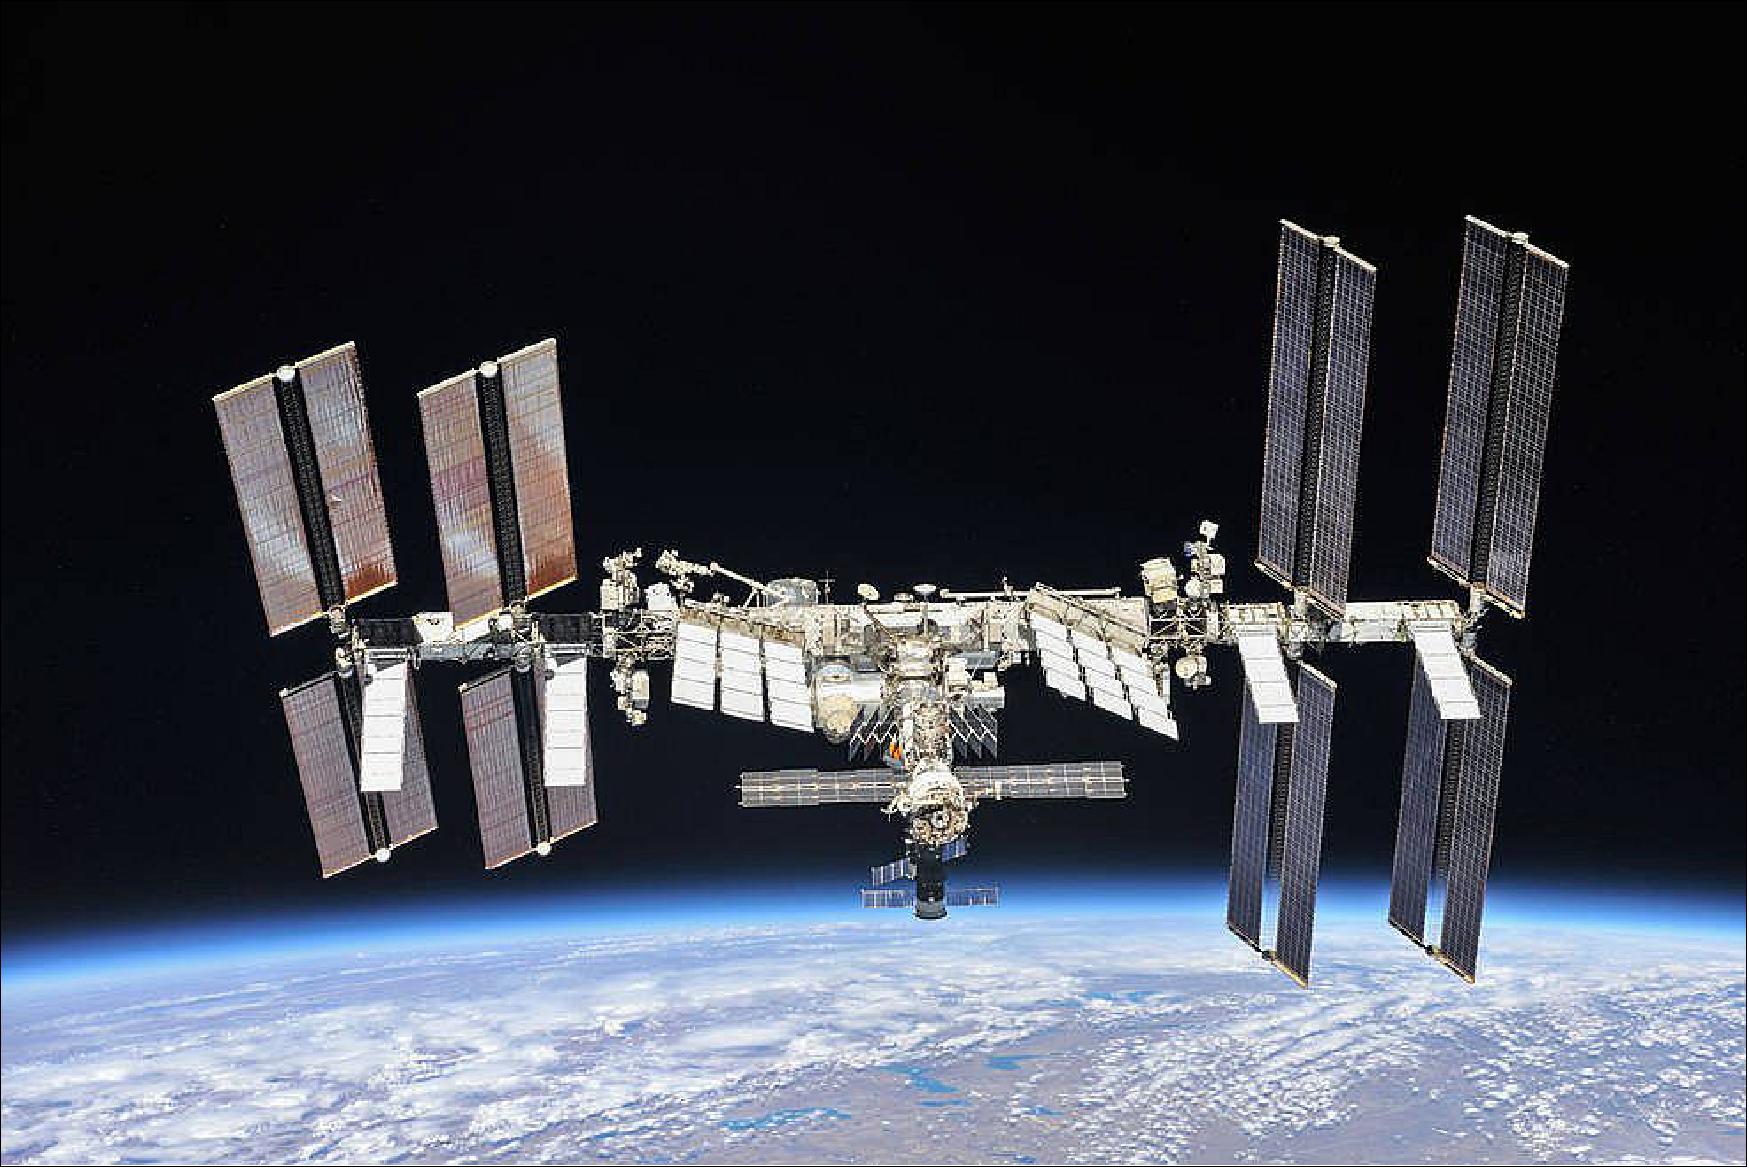 Figure 8: Astronauts and experiments on the International Space Station work to make life better on Earth and help humanity explore deep into the cosmos (image credit: NASA)